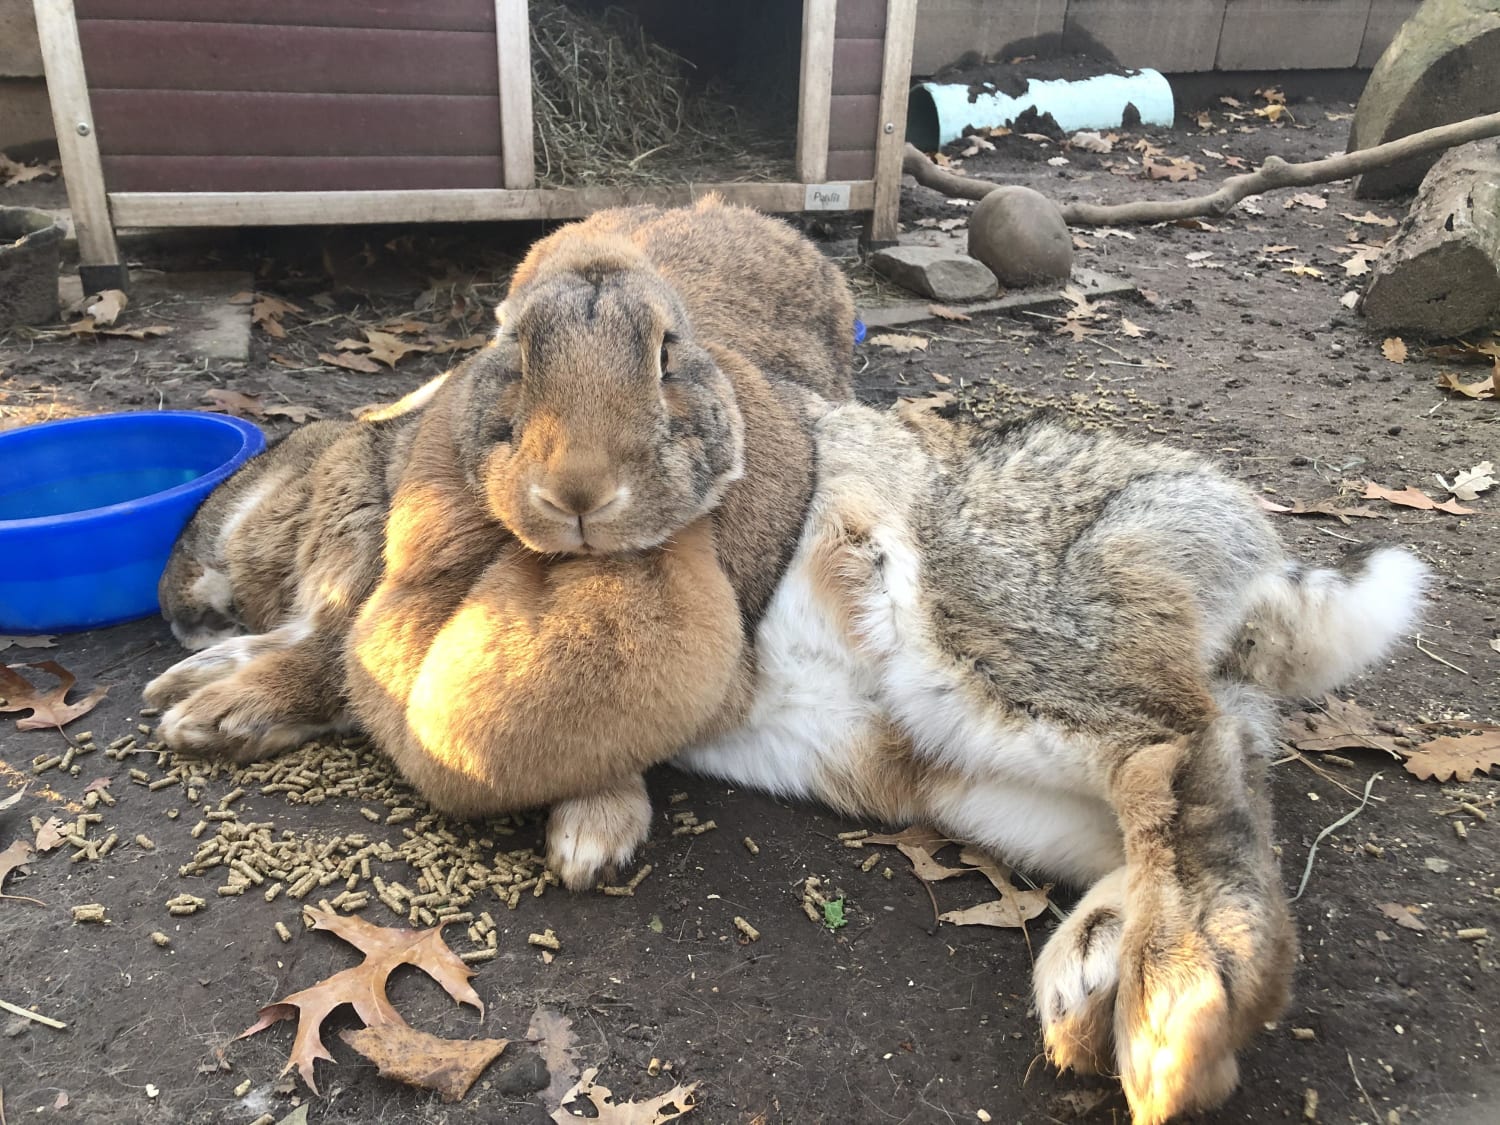 Female rabbits develop dewlaps when they are pregnant or if they are not spayed, and serve as a place to put fur to make nests for their bunnies! Susie’s dewlap seems to keep Thumper very warm! Susie has personal space issues and never leaves Thumpers side for very long